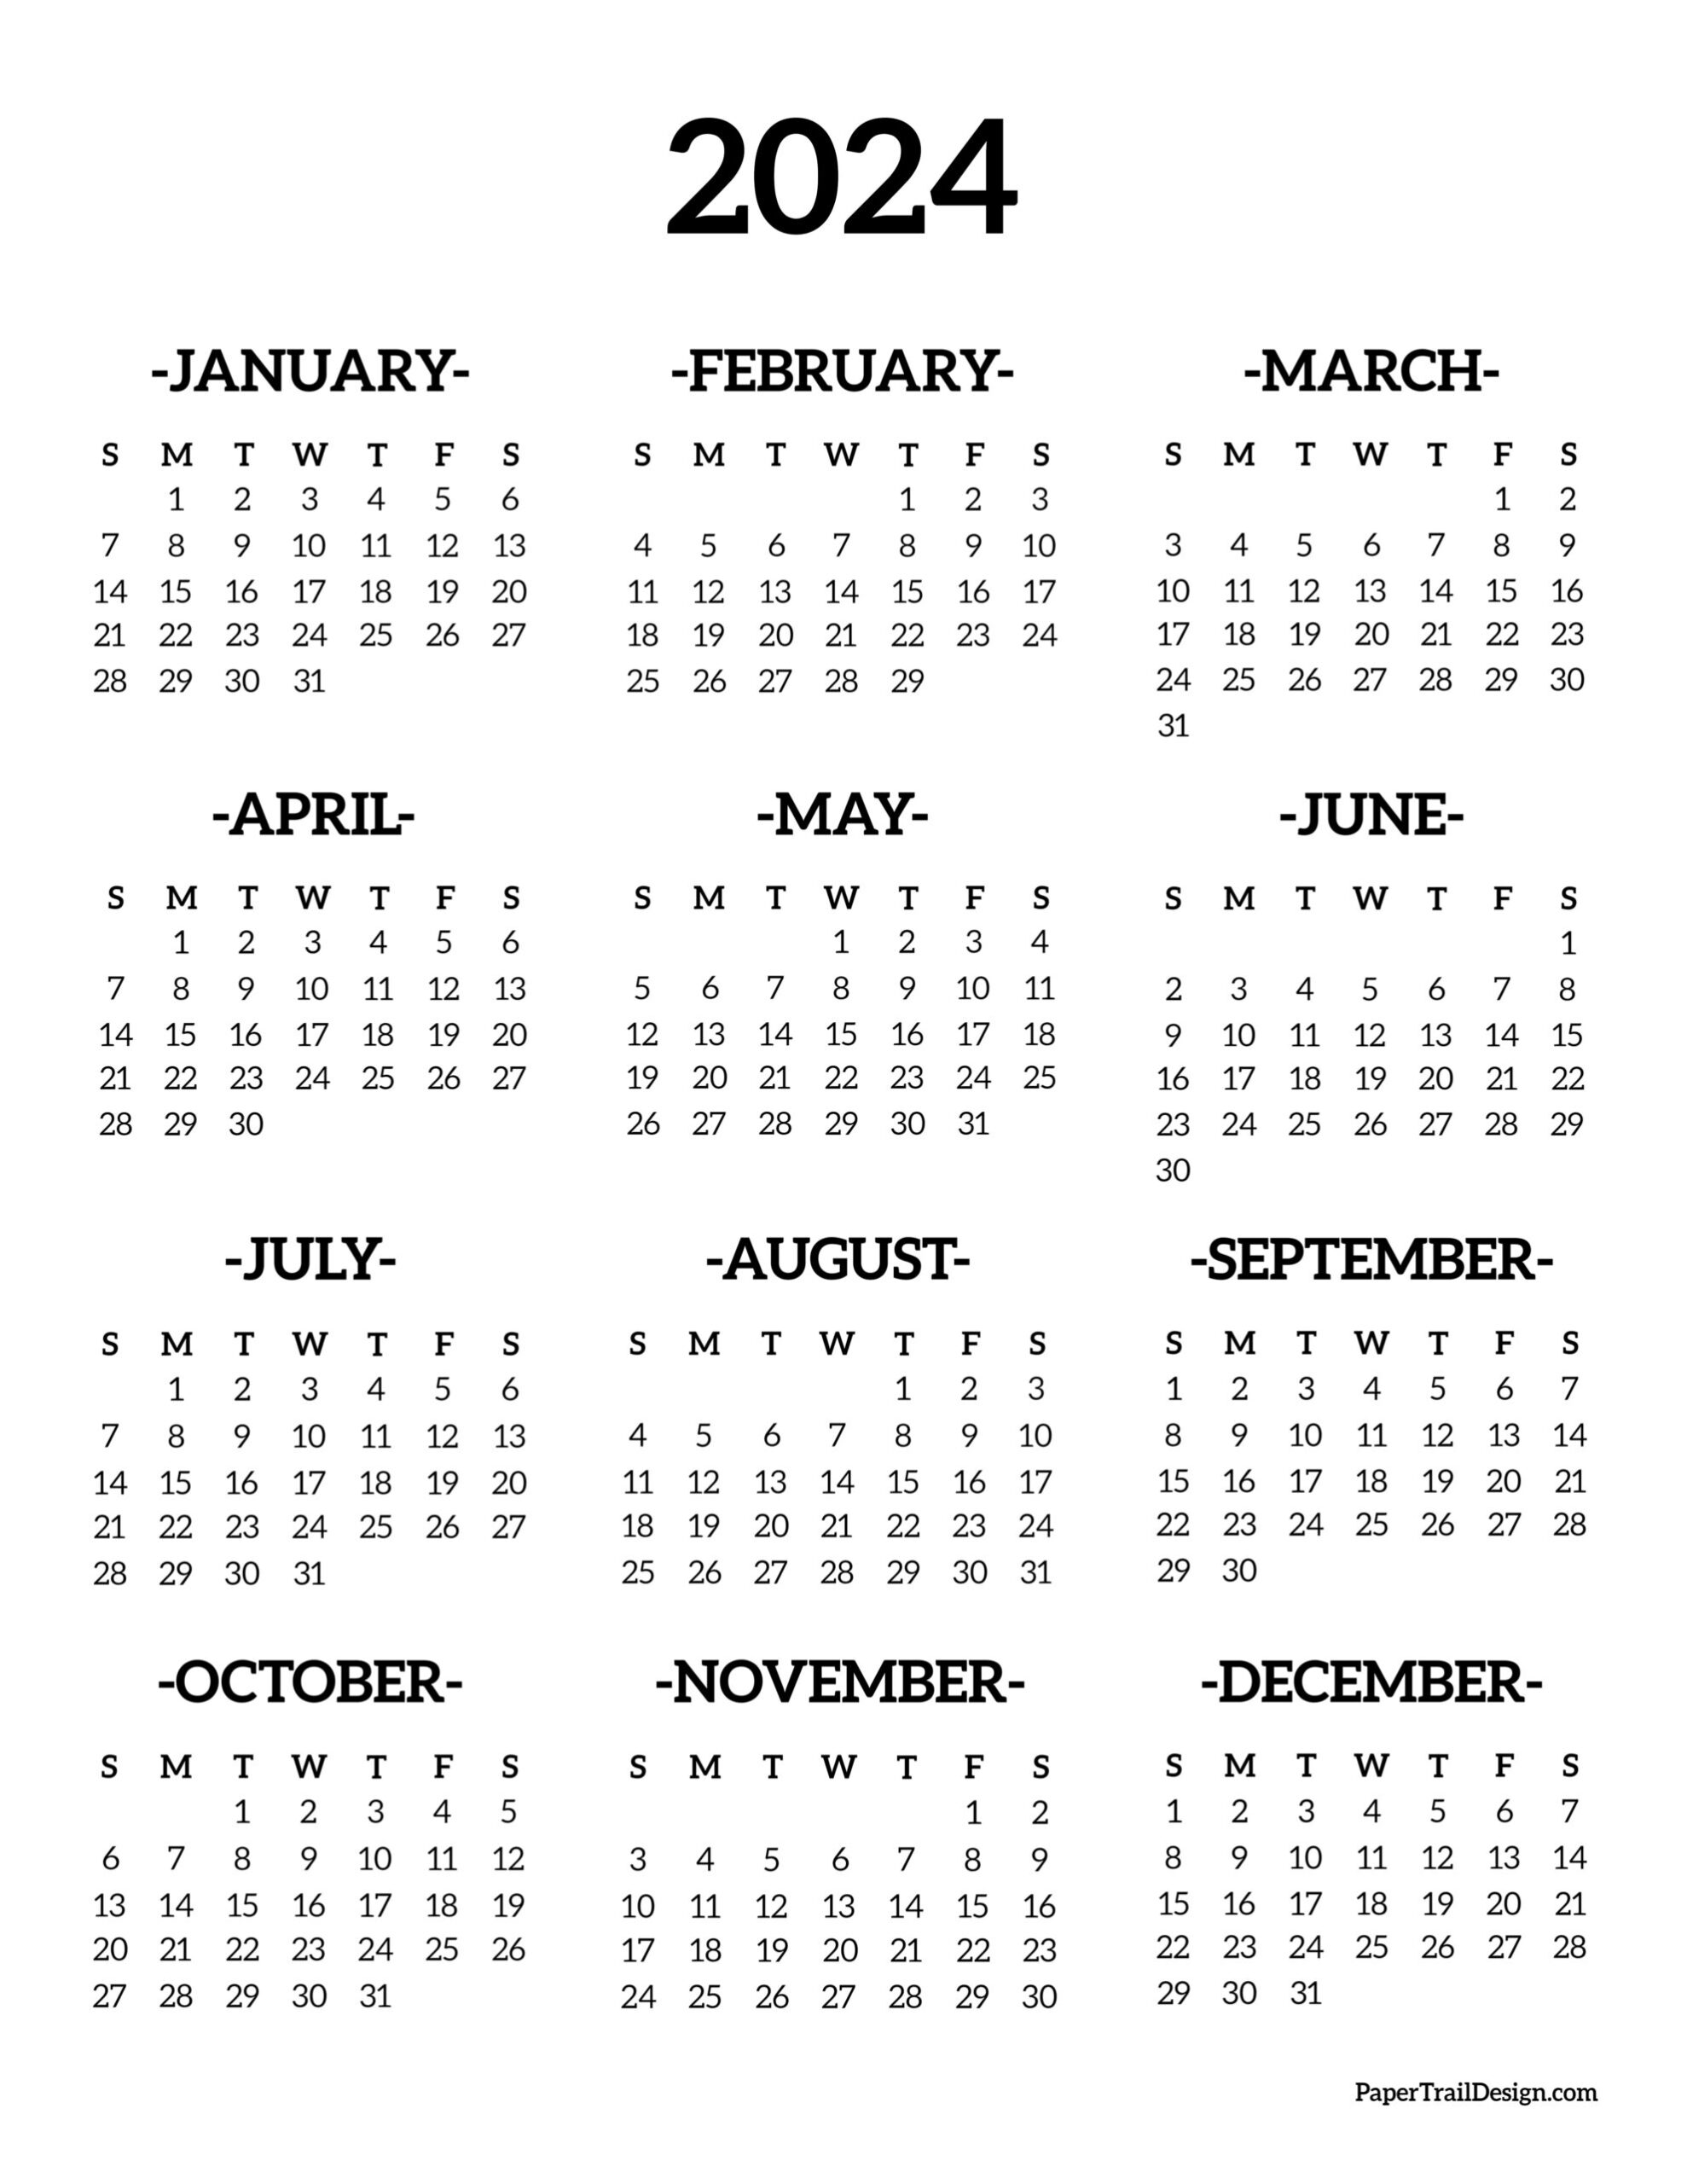 Calendar 2024 Printable One Page - Paper Trail Design for Year Calendar Printable 2024